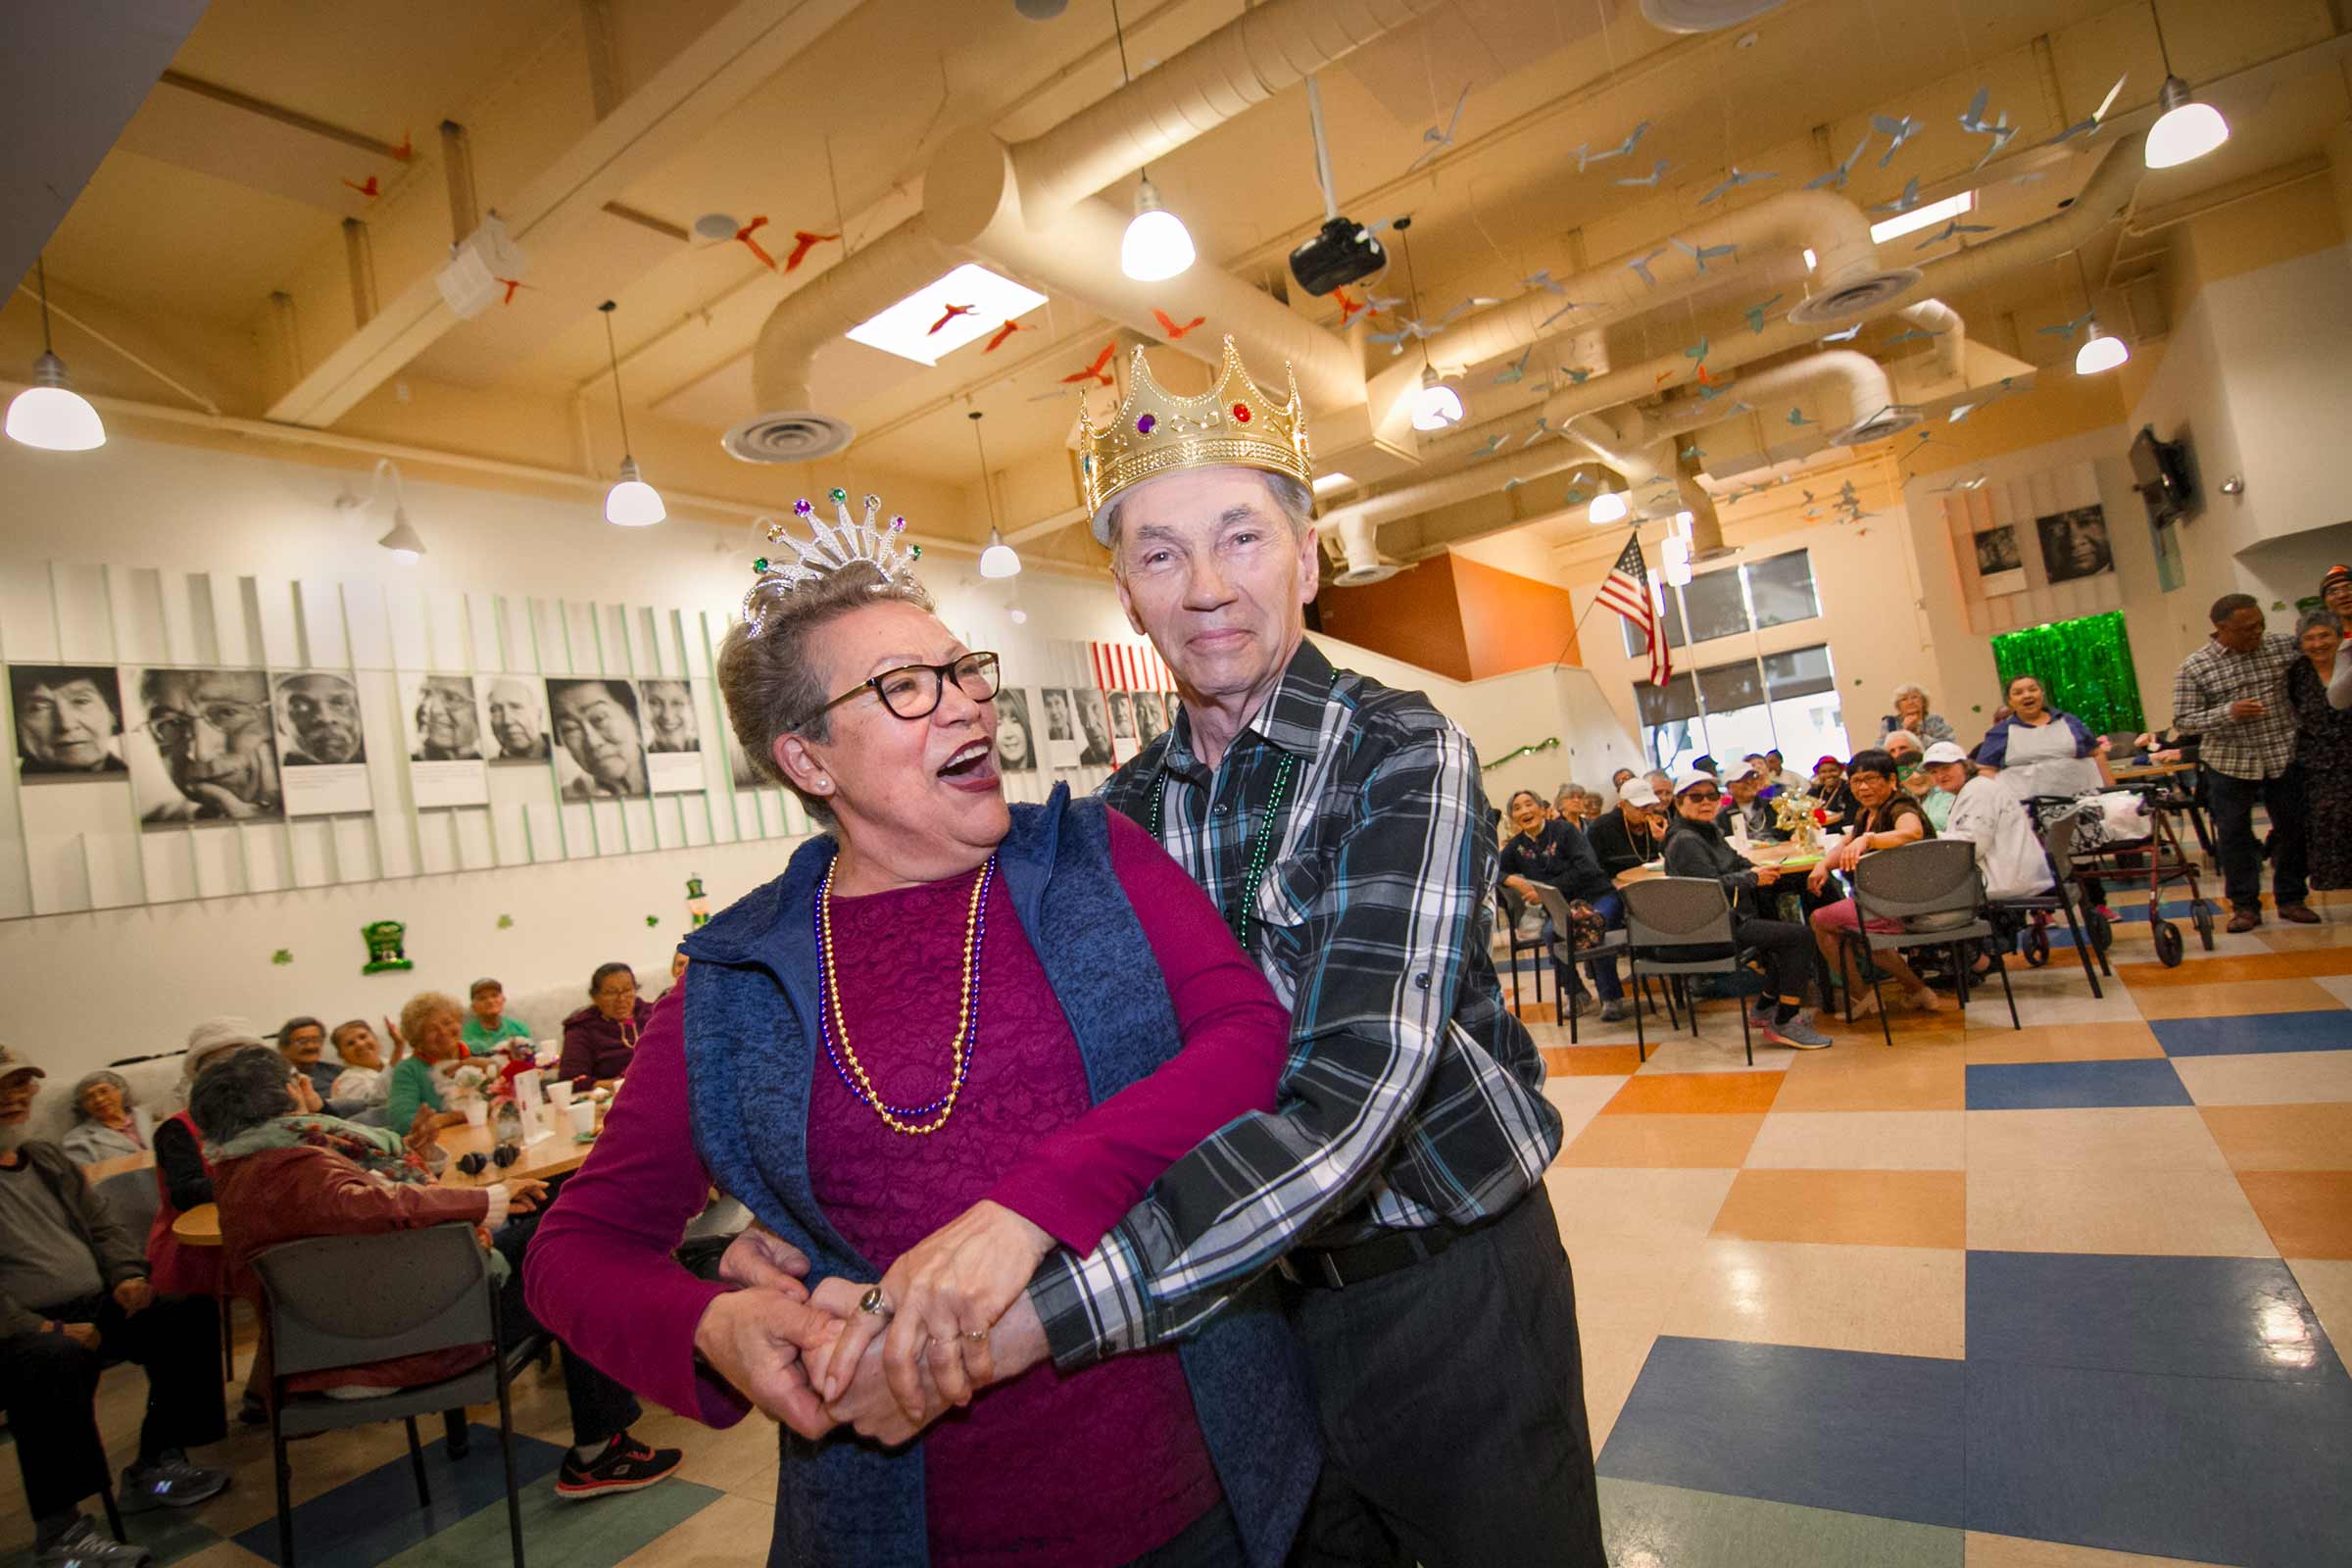 Senior Prom King and Queen at downtown senior center